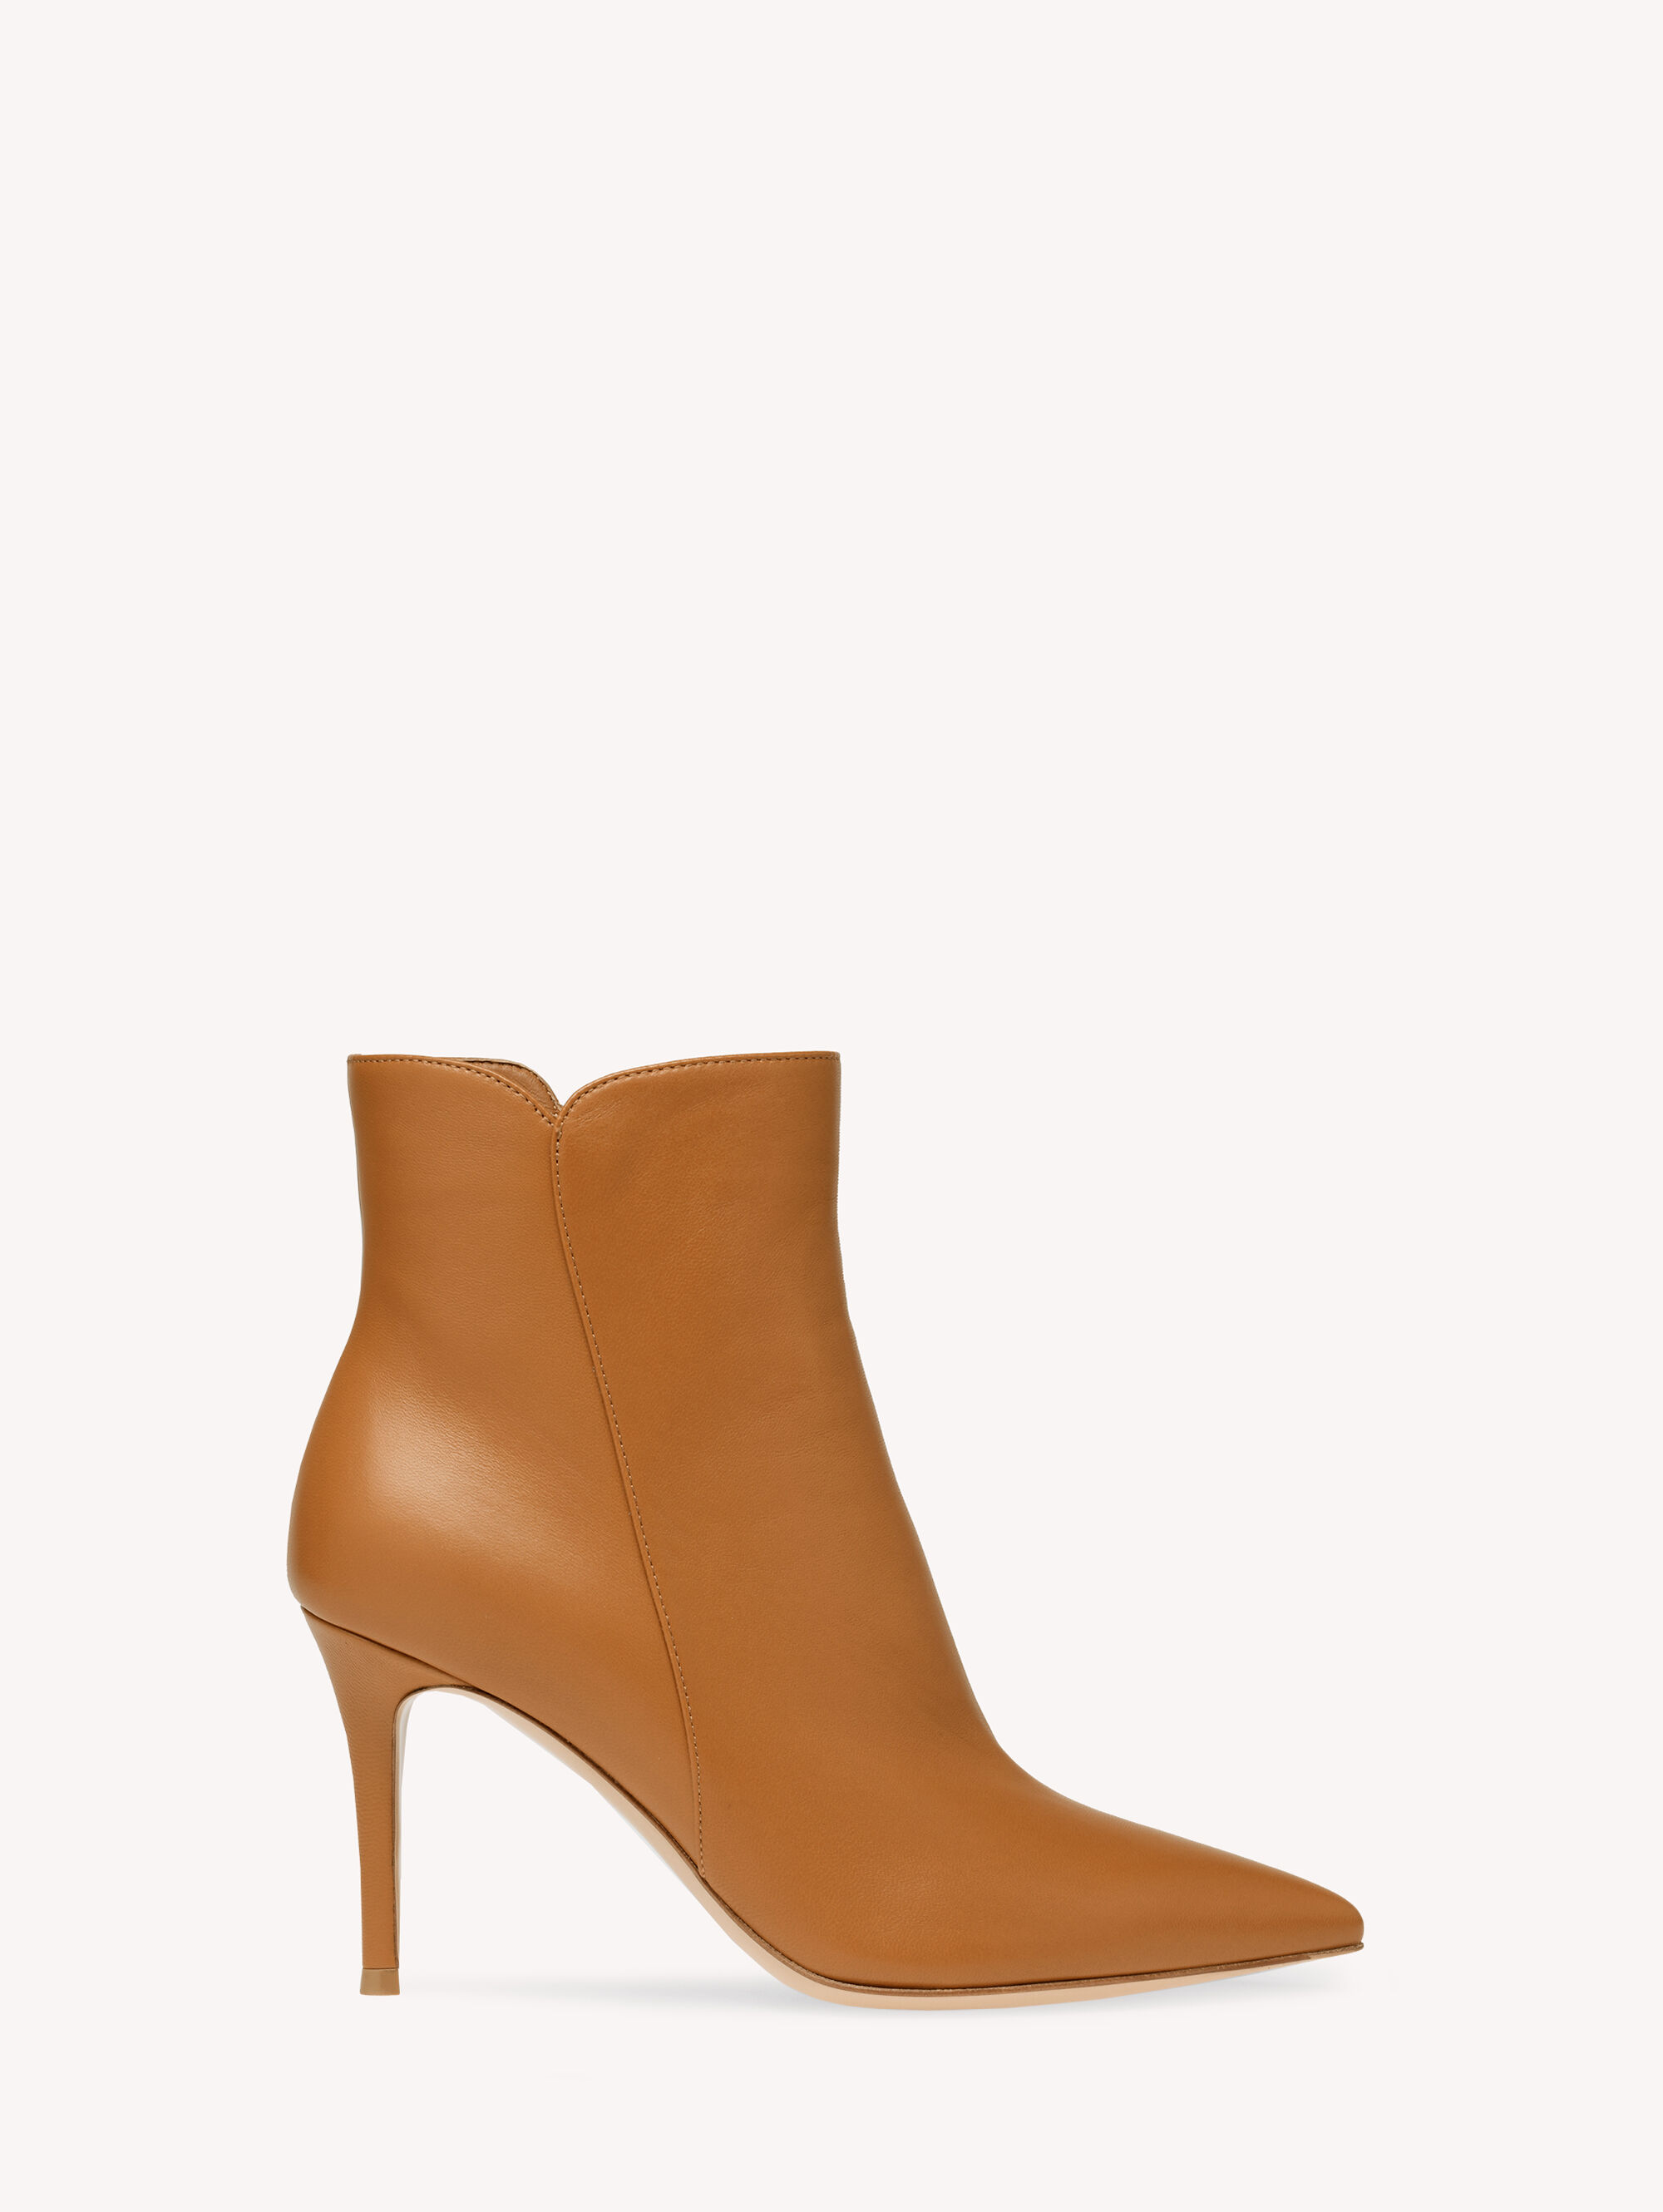 Luxury Ankle Boots for Women | Gianvito Rossi